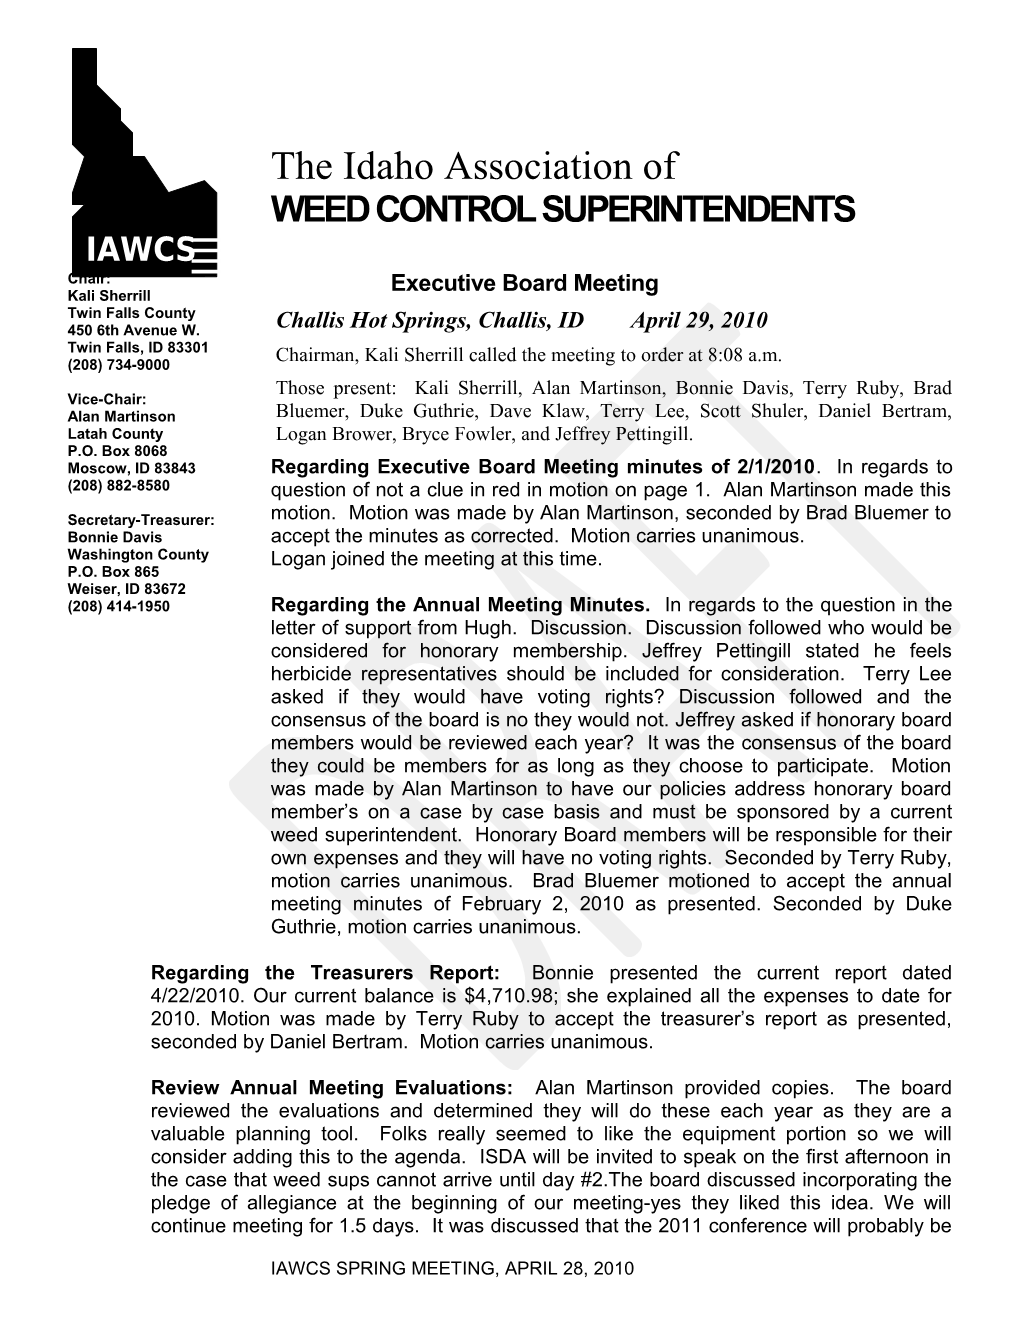 Weed Control Superintendents